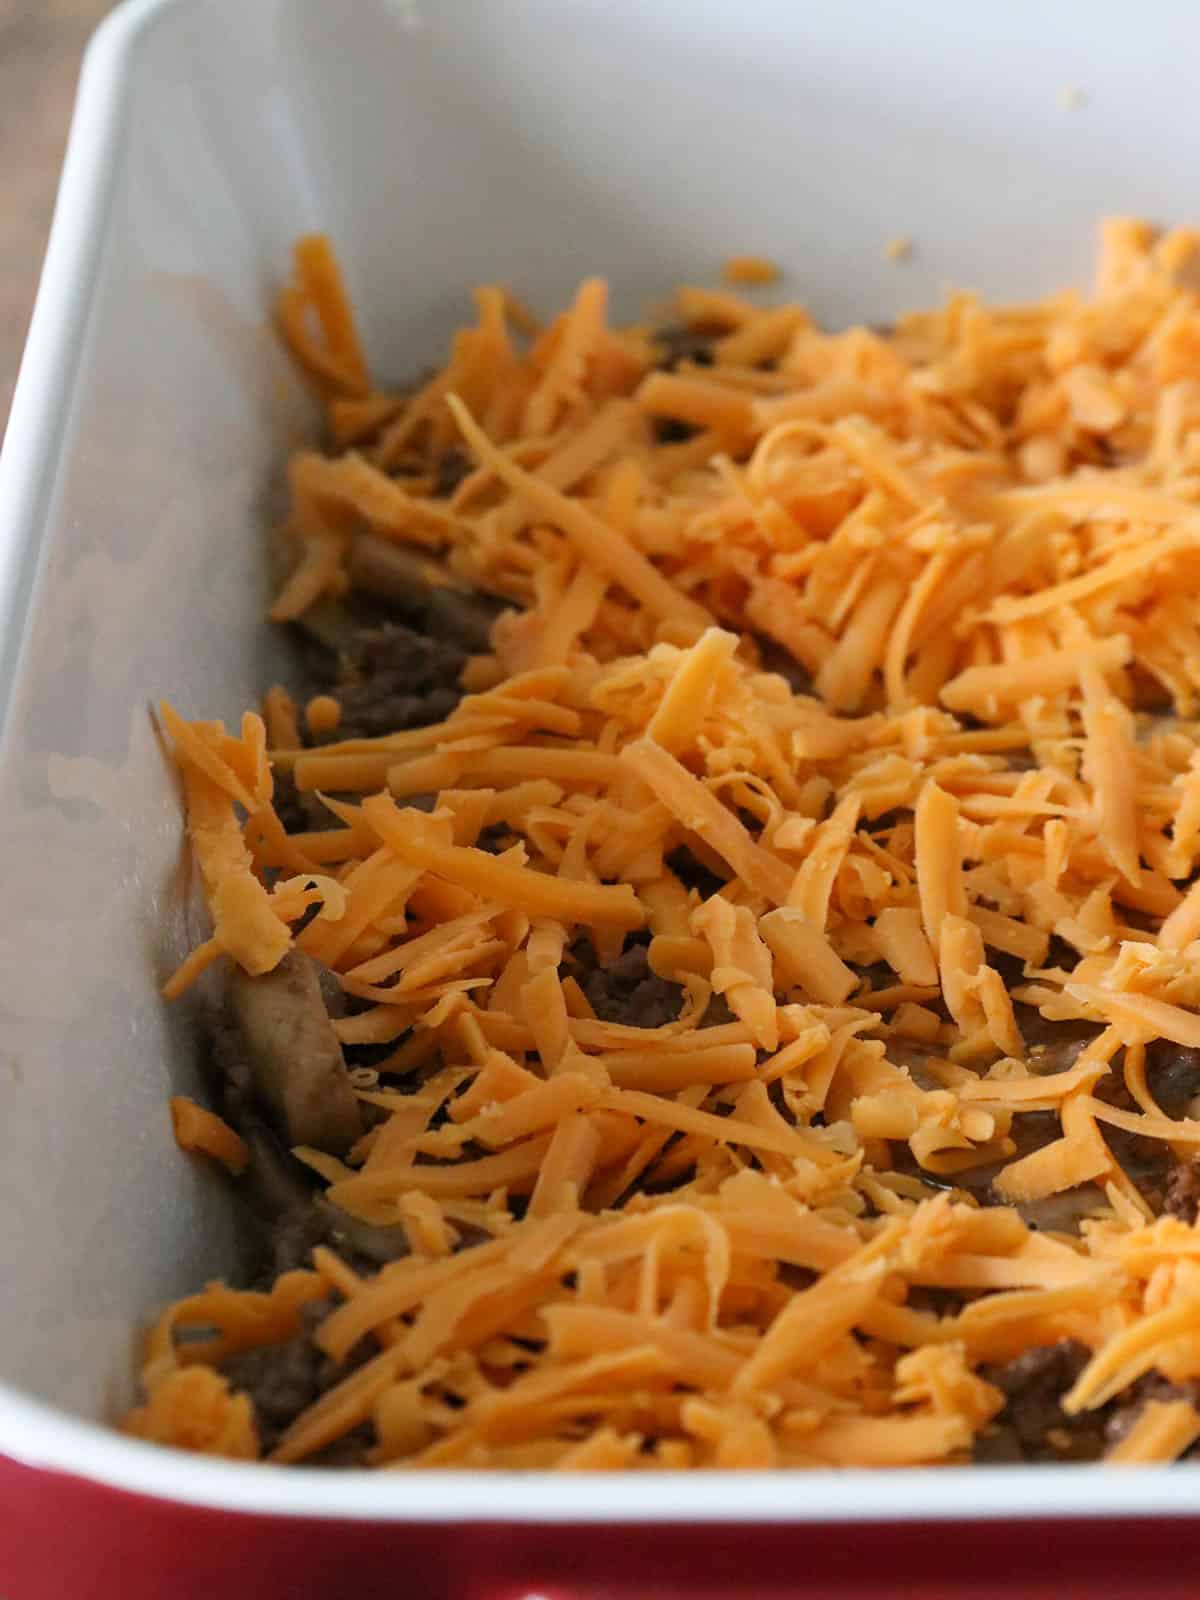 The shredded cheddar cheese sprinkled over the beef in the baking dish.